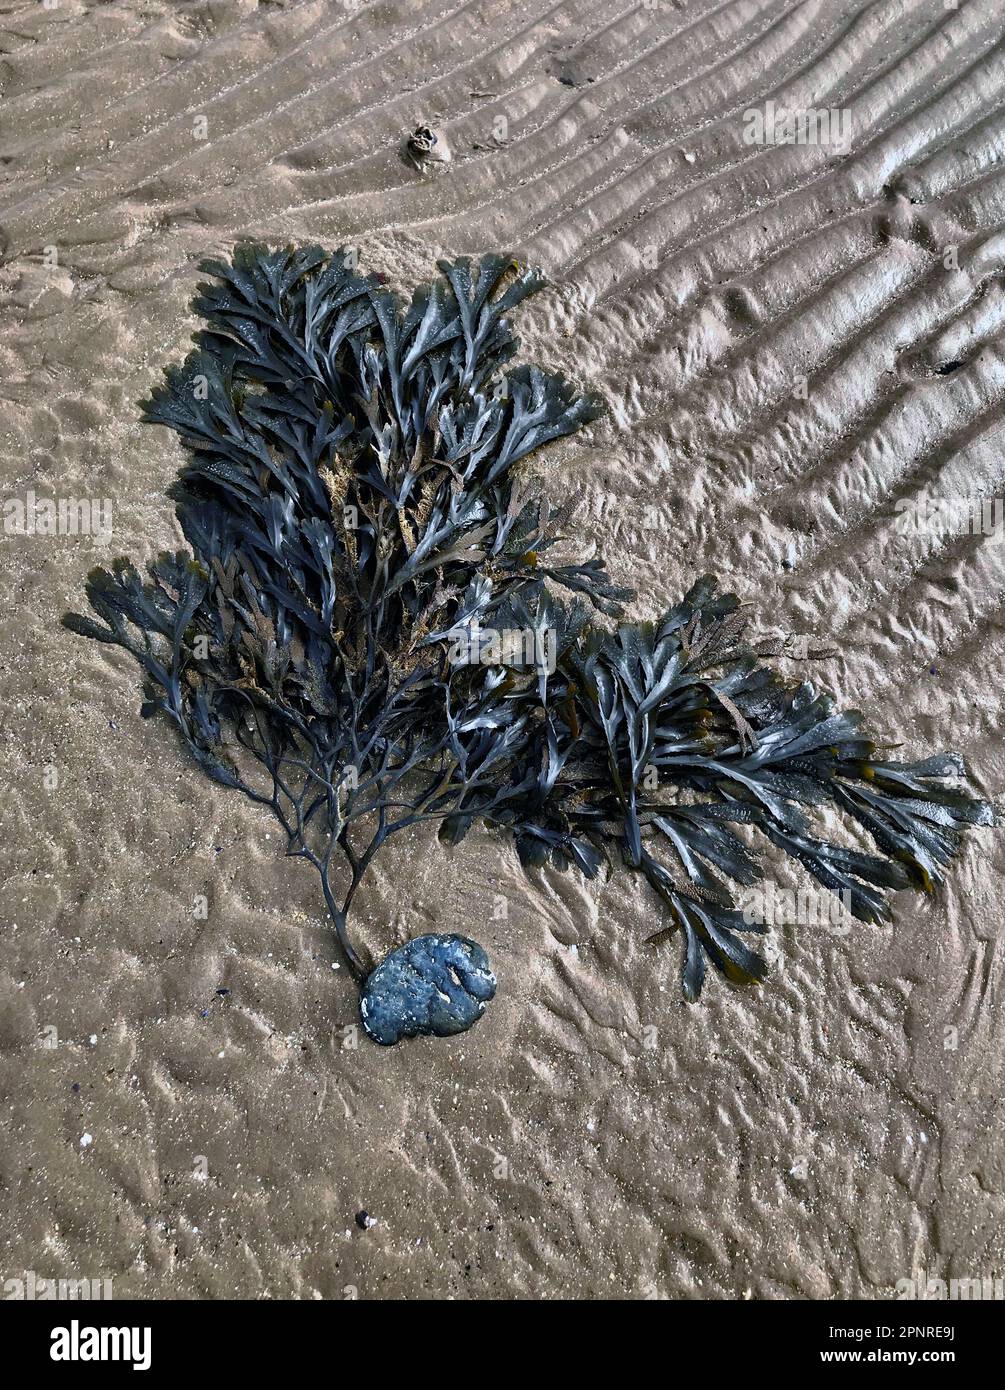 Serrated wrack (Fucus serratus) seaweed washed up after a storm on the sea shore, still attached to a stone Evening light turns ripples in sand golden Stock Photo